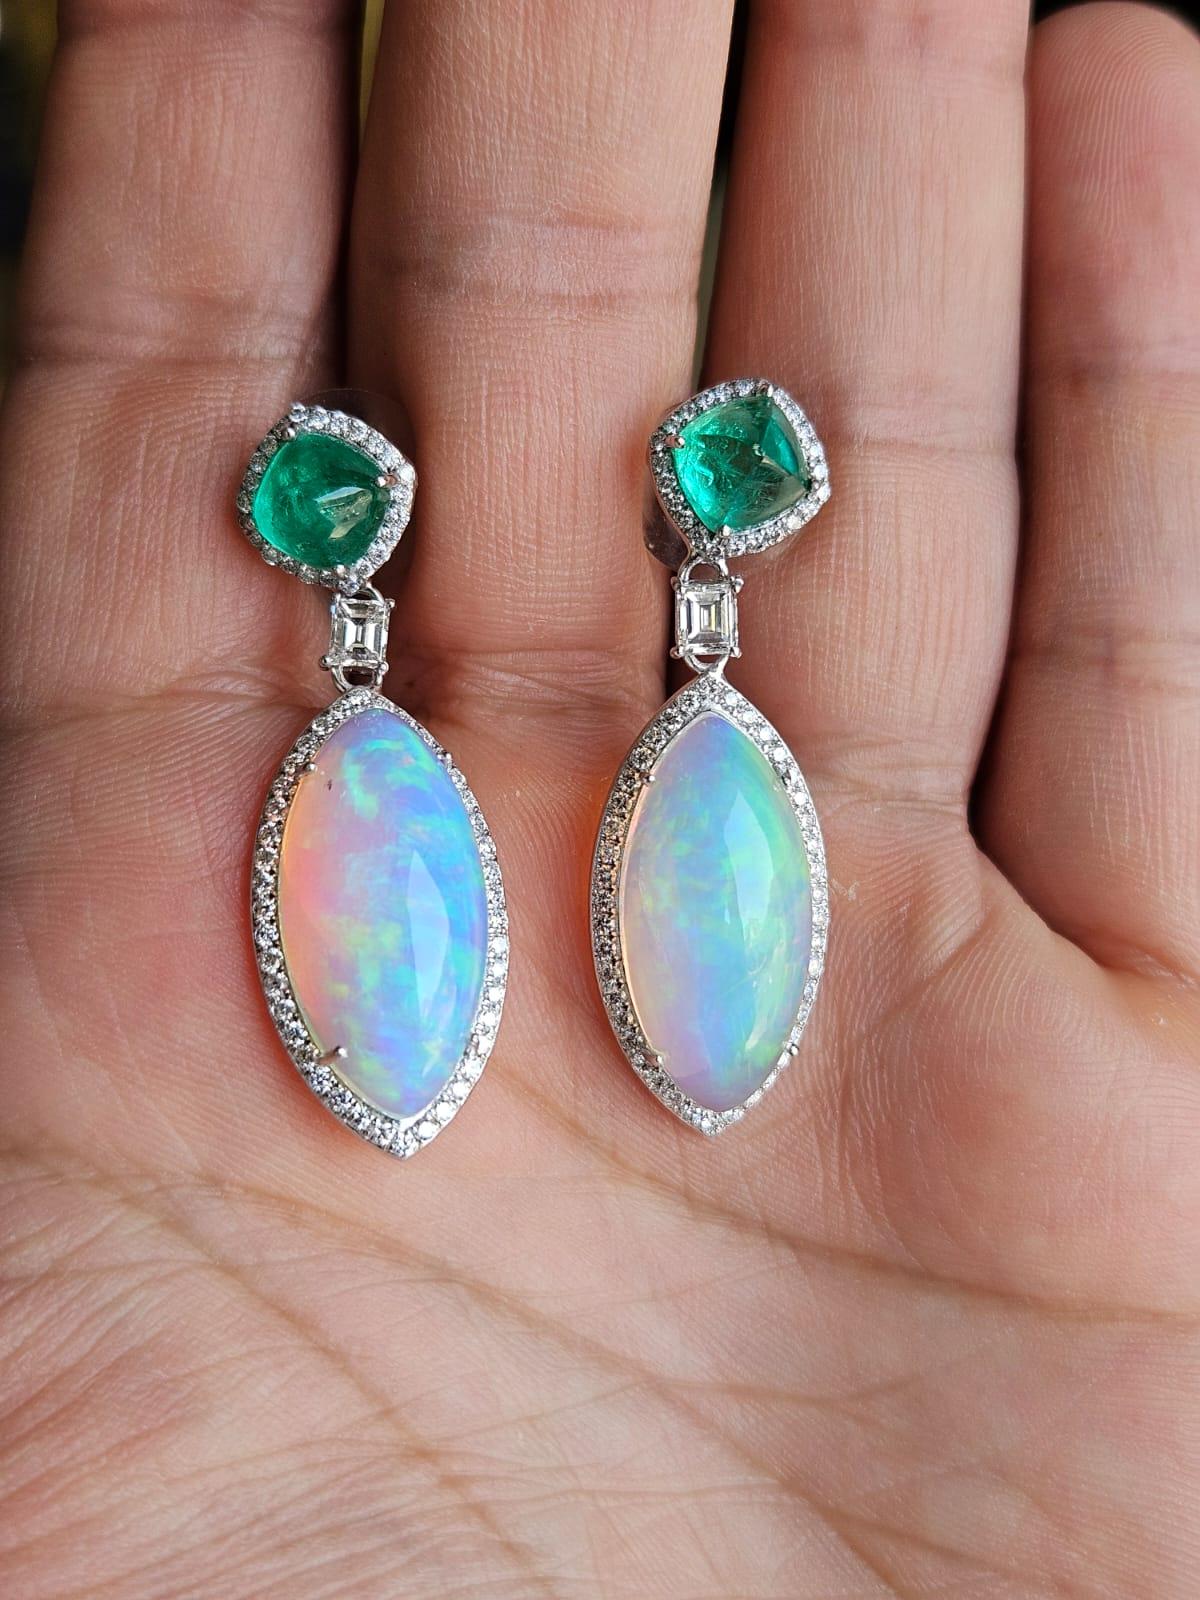 A very gorgeous and beautiful, Emerald & Opal Dangle Earrings set in 18K White Gold & Diamonds. The weight of the Emerald Sugarloafs is 3.12 carats. The Emerald sugarloafs are completely natural, without any treatment and are of Colombian origin.